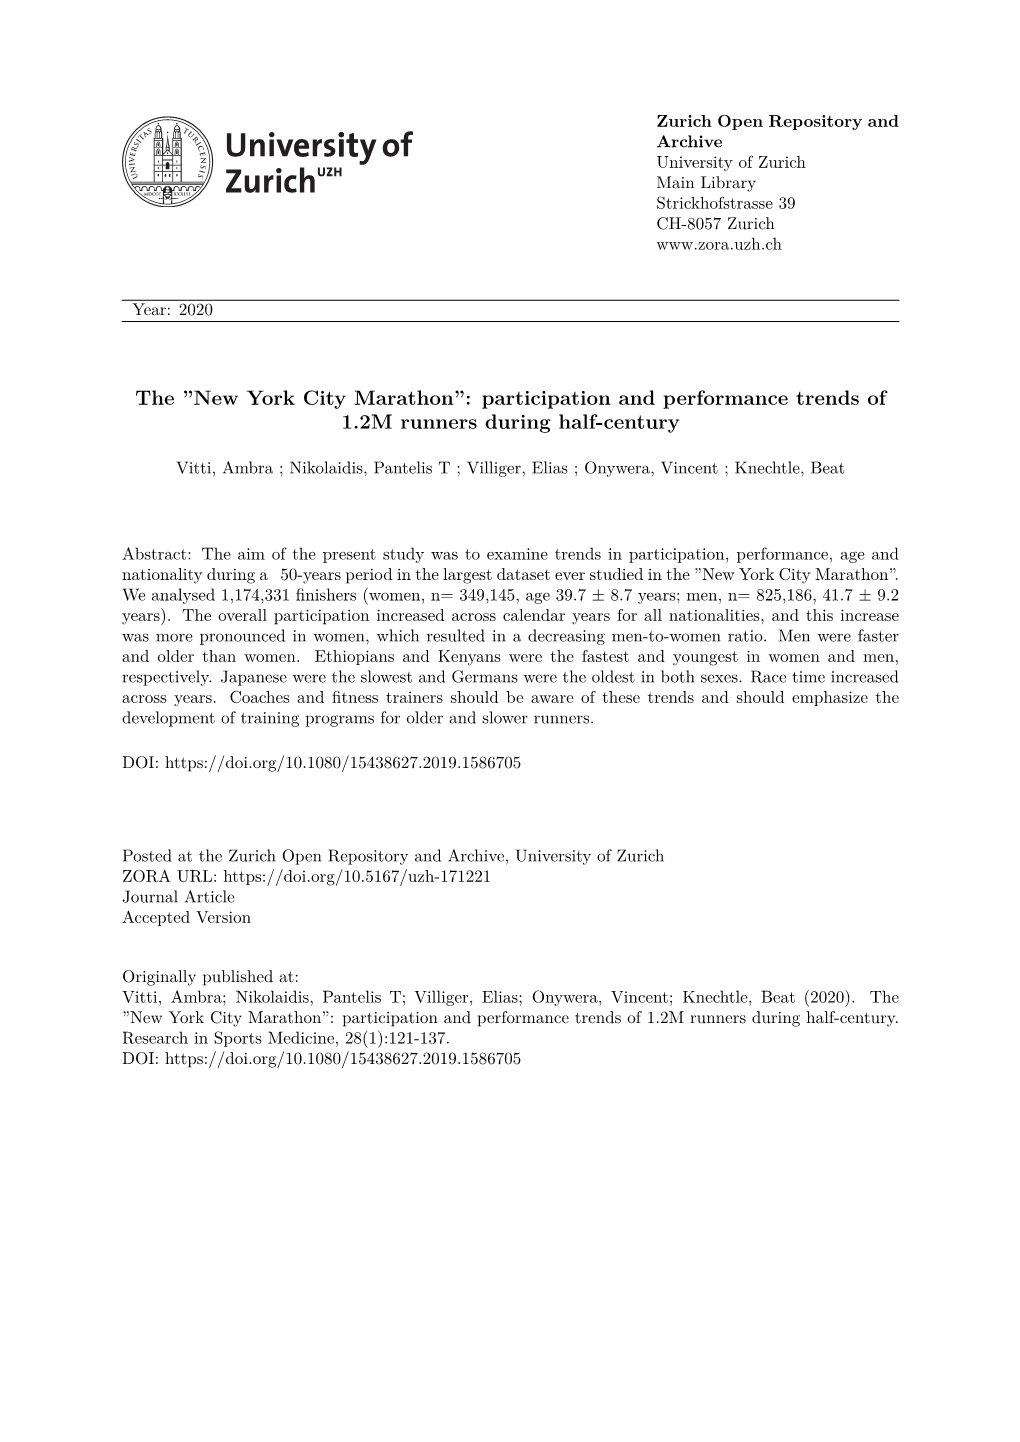 Participation and Performance Trends of 1.2M Runners in the 'New York